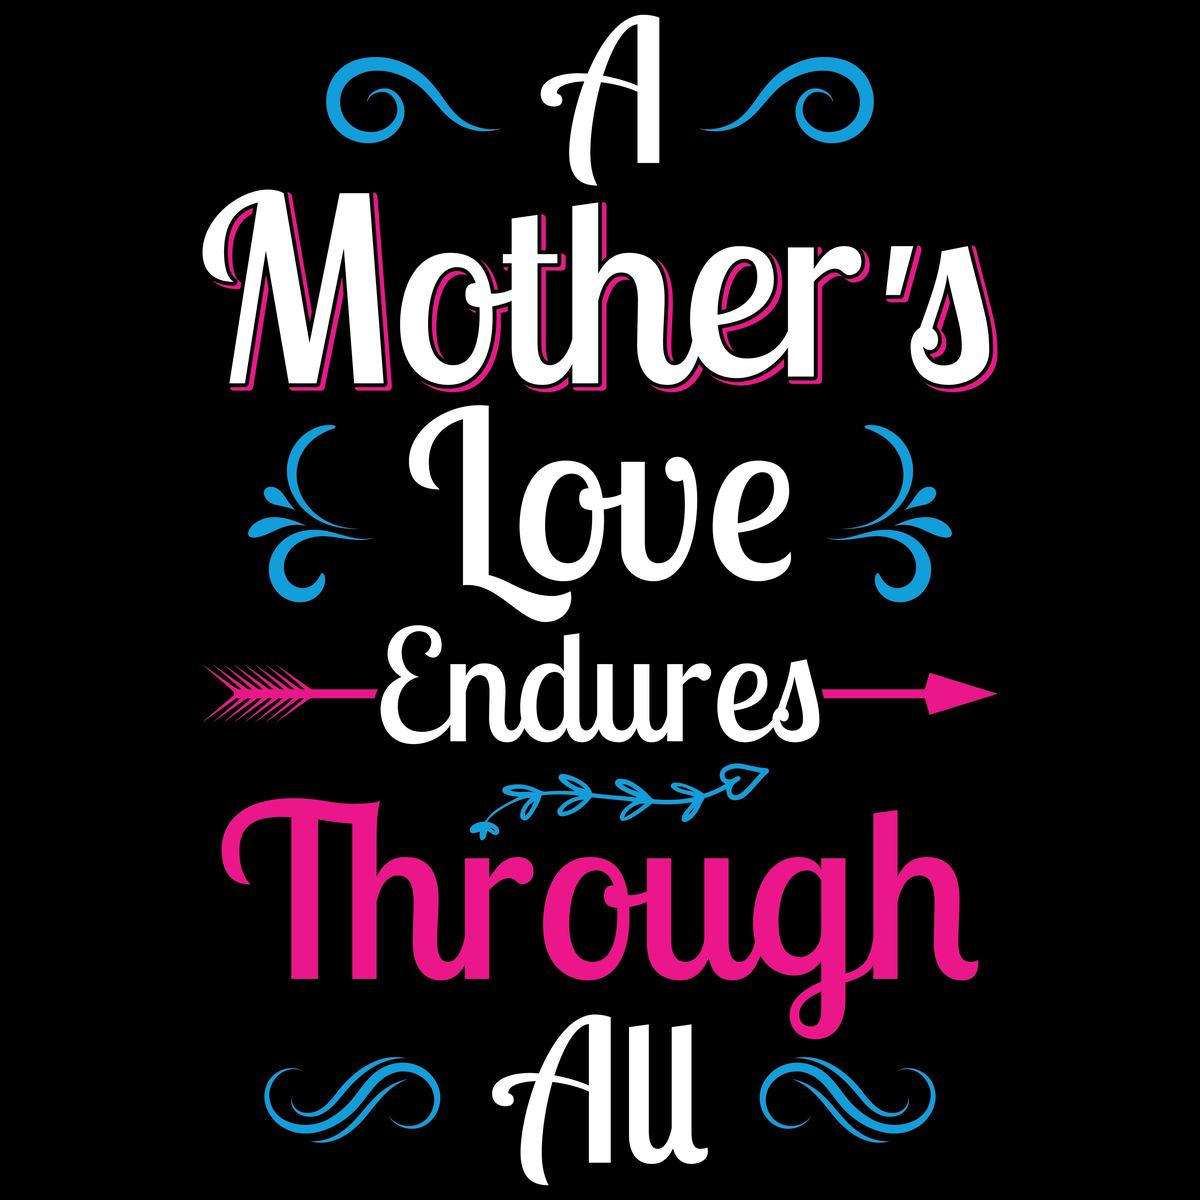 A mother's love quote that reads "A mother's love endures through all".